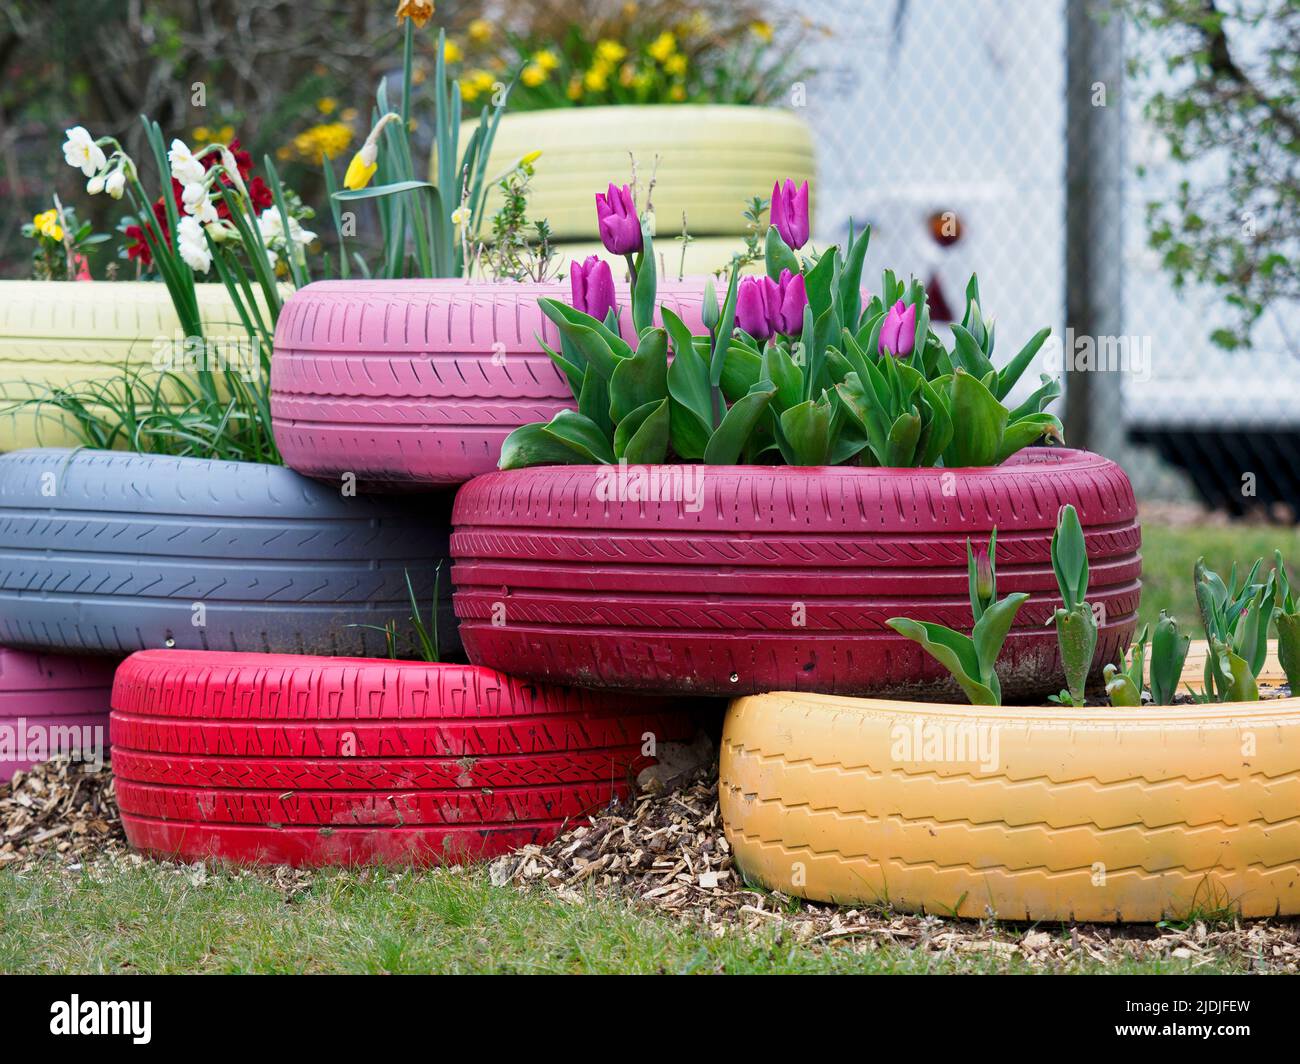 Recycled car tyres used as flower planters, Hampshire, UK Stock Photo